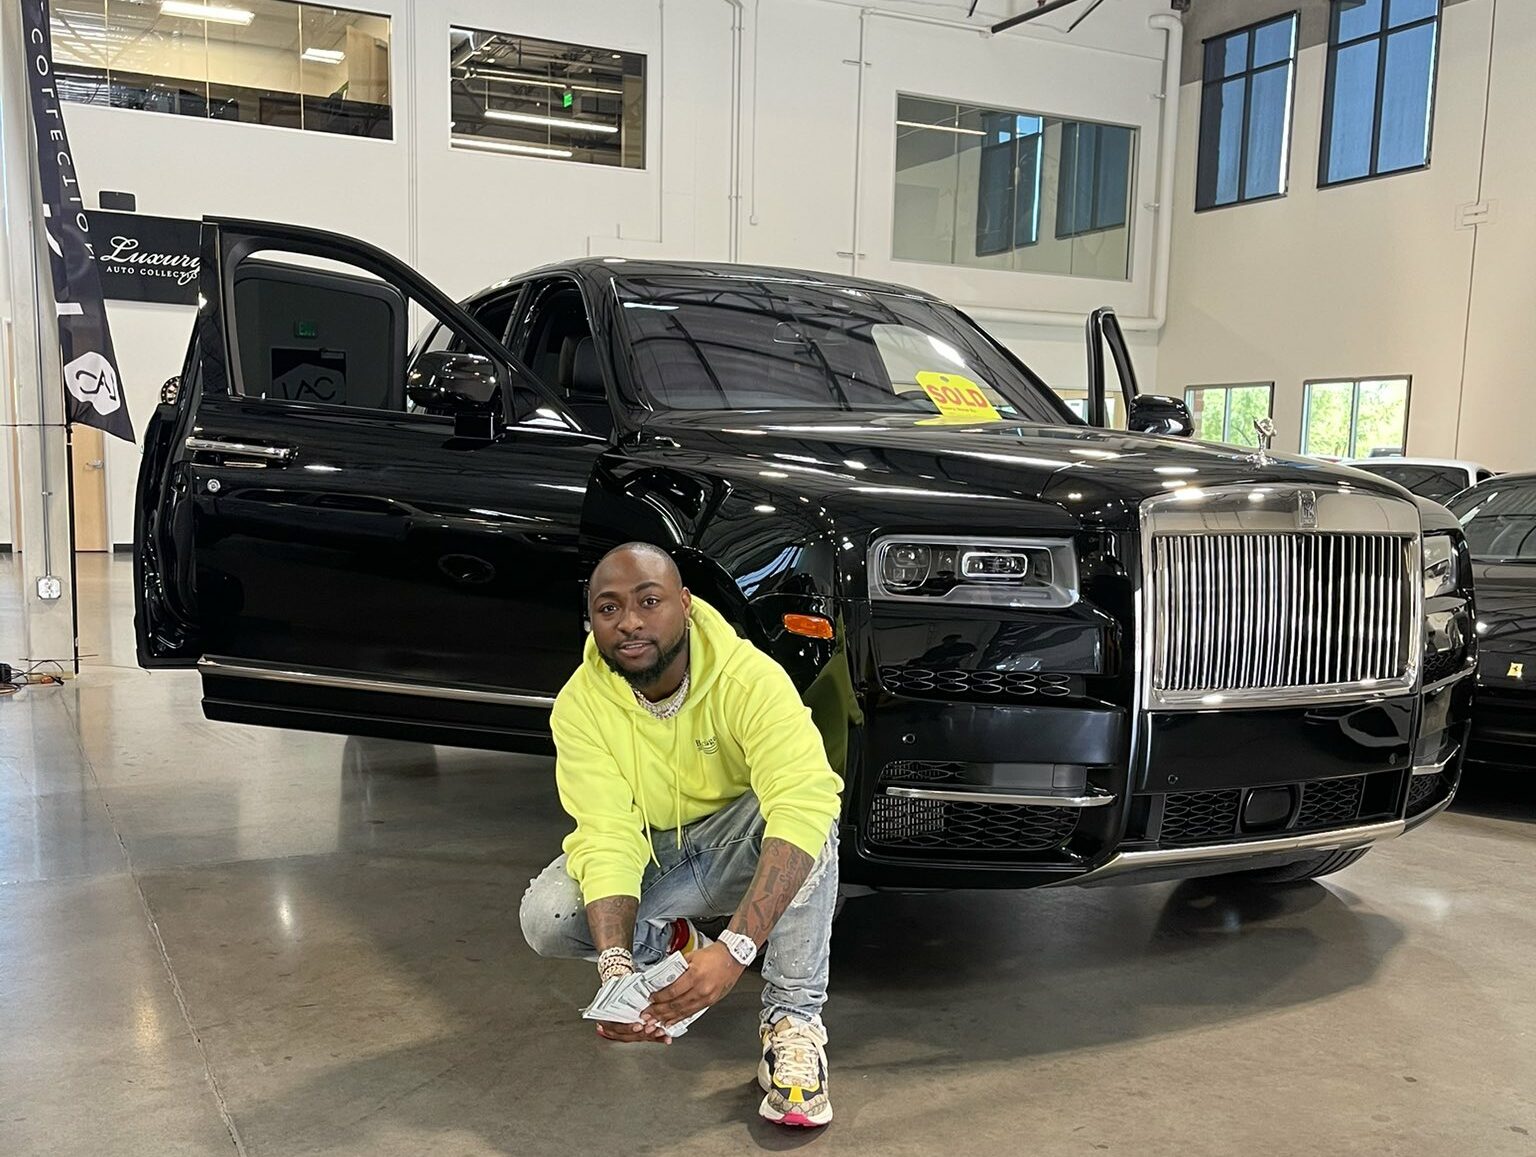 13 quick facts about Davido's $340K Rolls Royce Cullinan - P.M. News